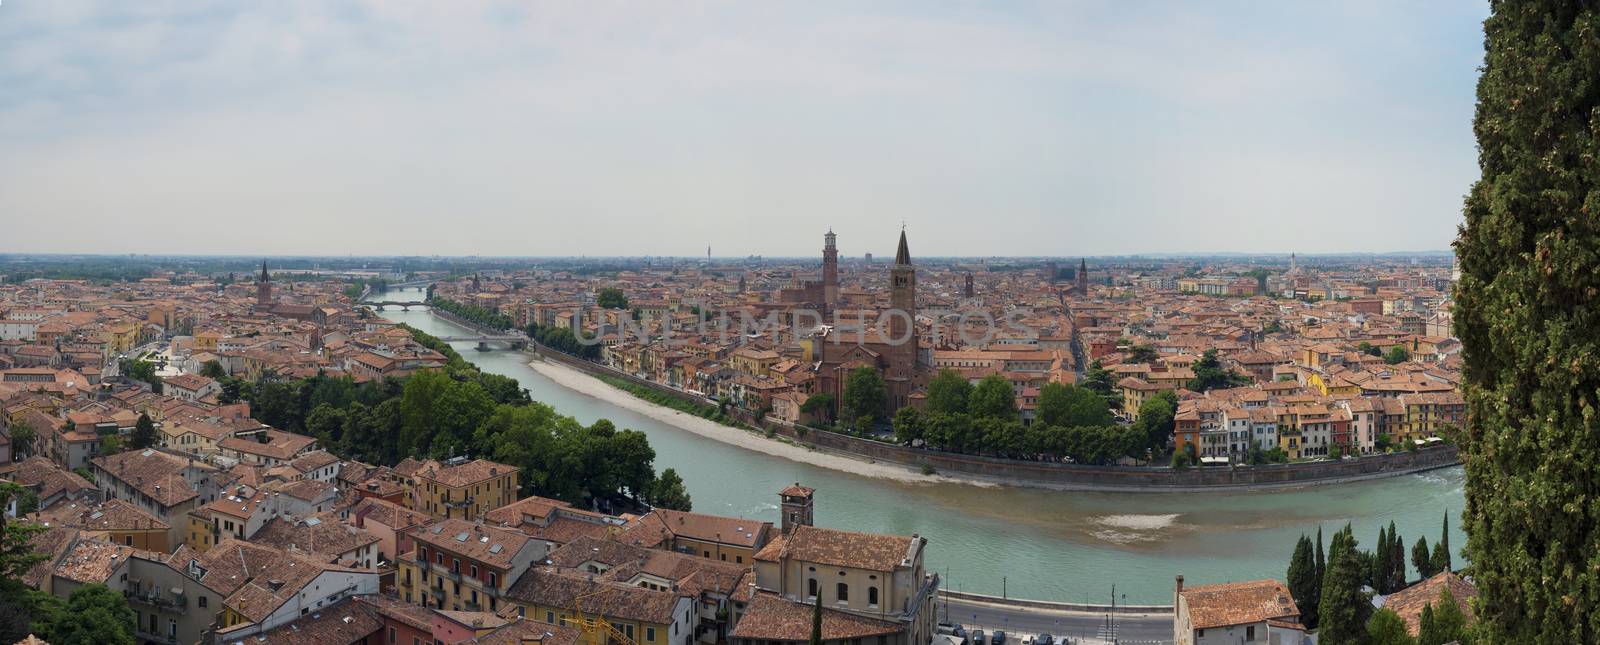 VERONA, ITALY - JULY 13: Stitched panorama of Verona seeing from San Pietro castle. July 13, 2015 in Verona.